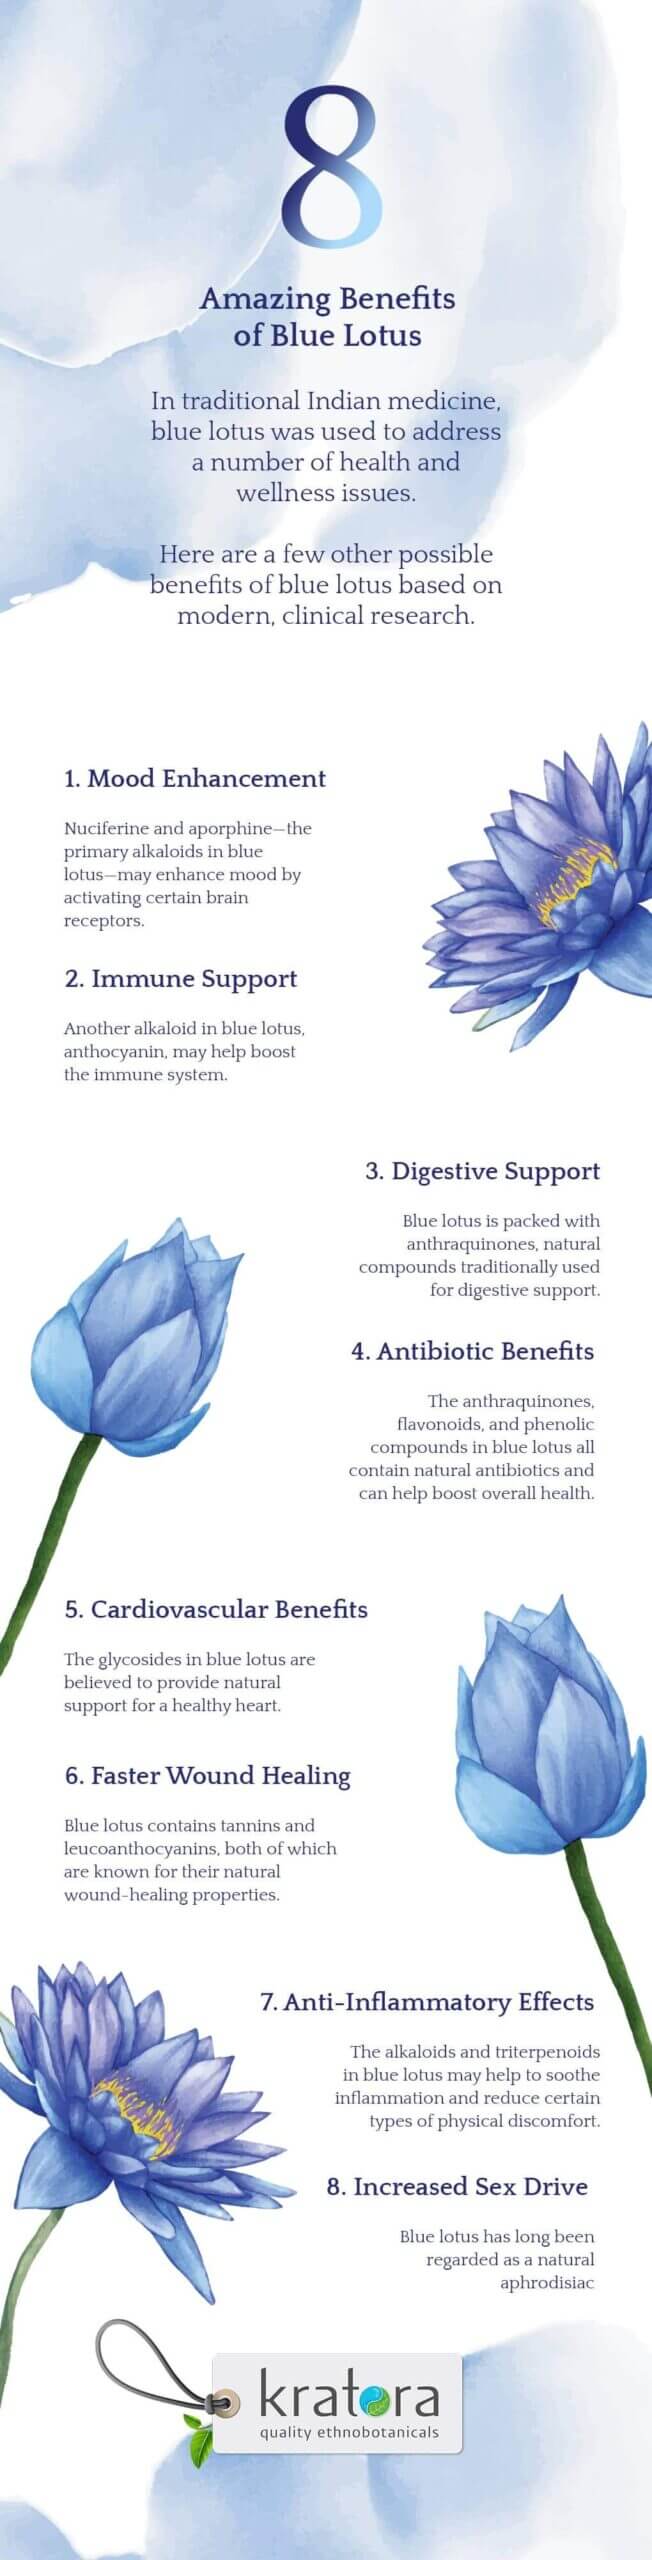 Infographic of Benefits of Blue Lotus